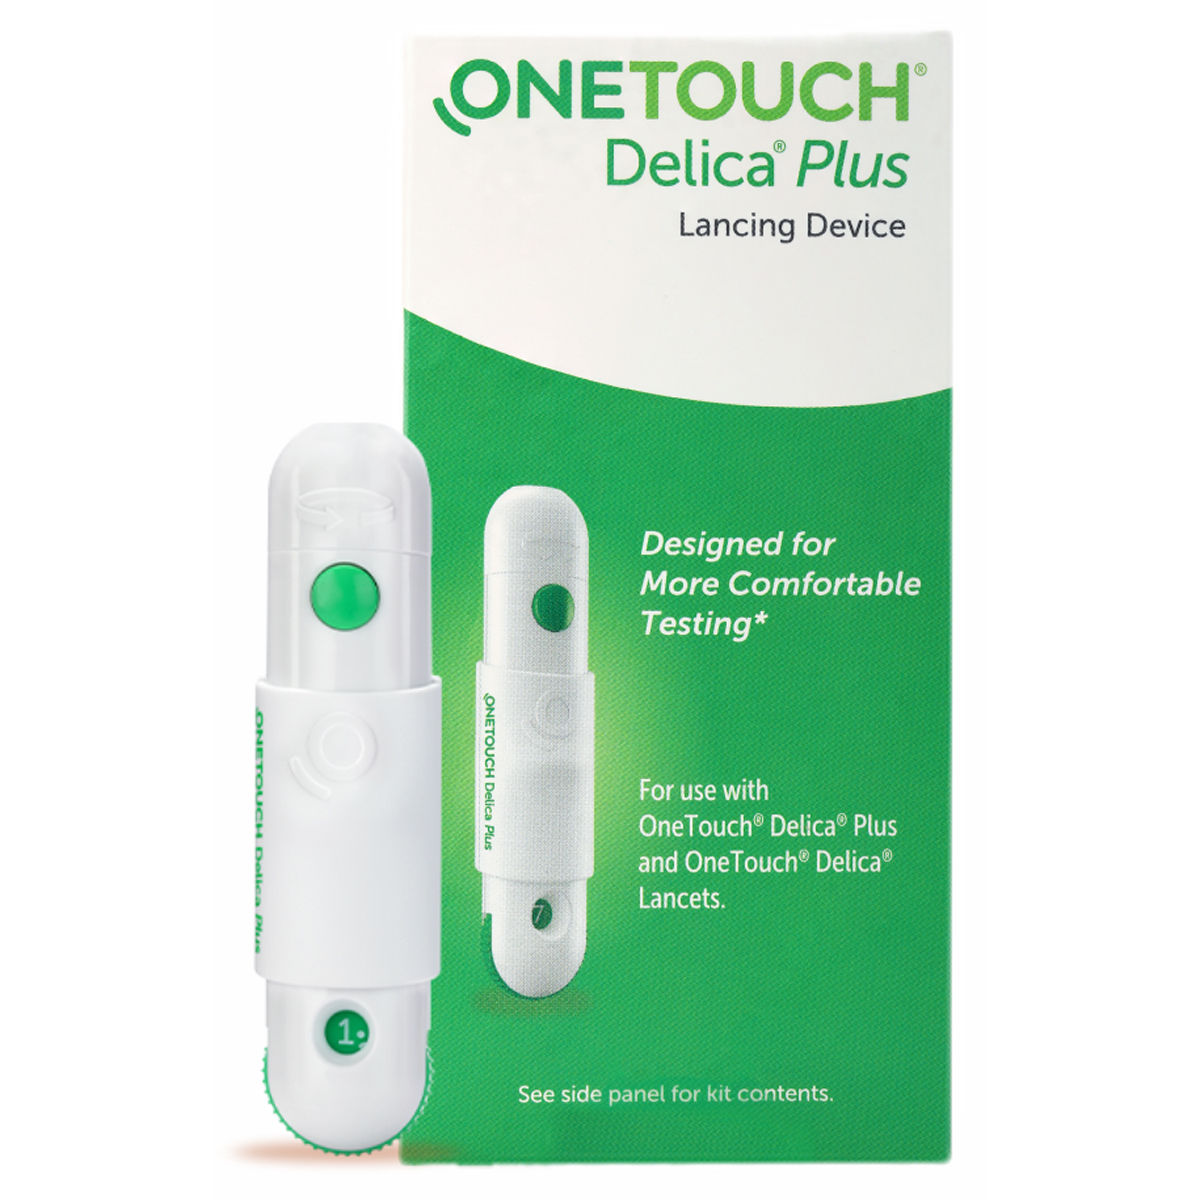 Buy OneTouch Delica Plus Lancing Device, 1 Count Online